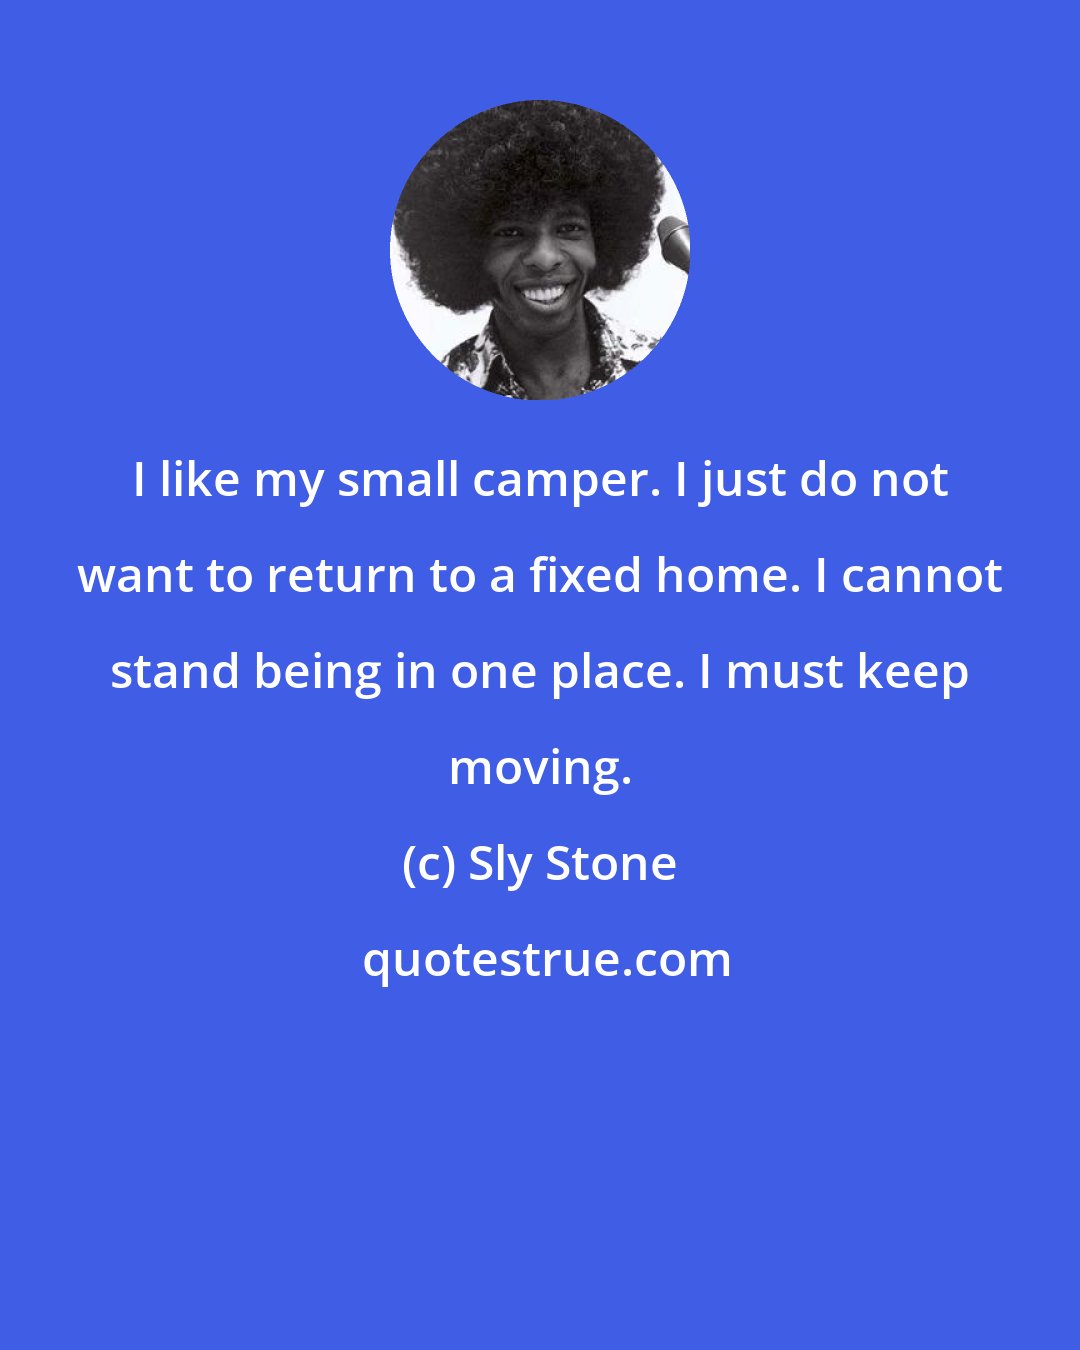 Sly Stone: I like my small camper. I just do not want to return to a fixed home. I cannot stand being in one place. I must keep moving.